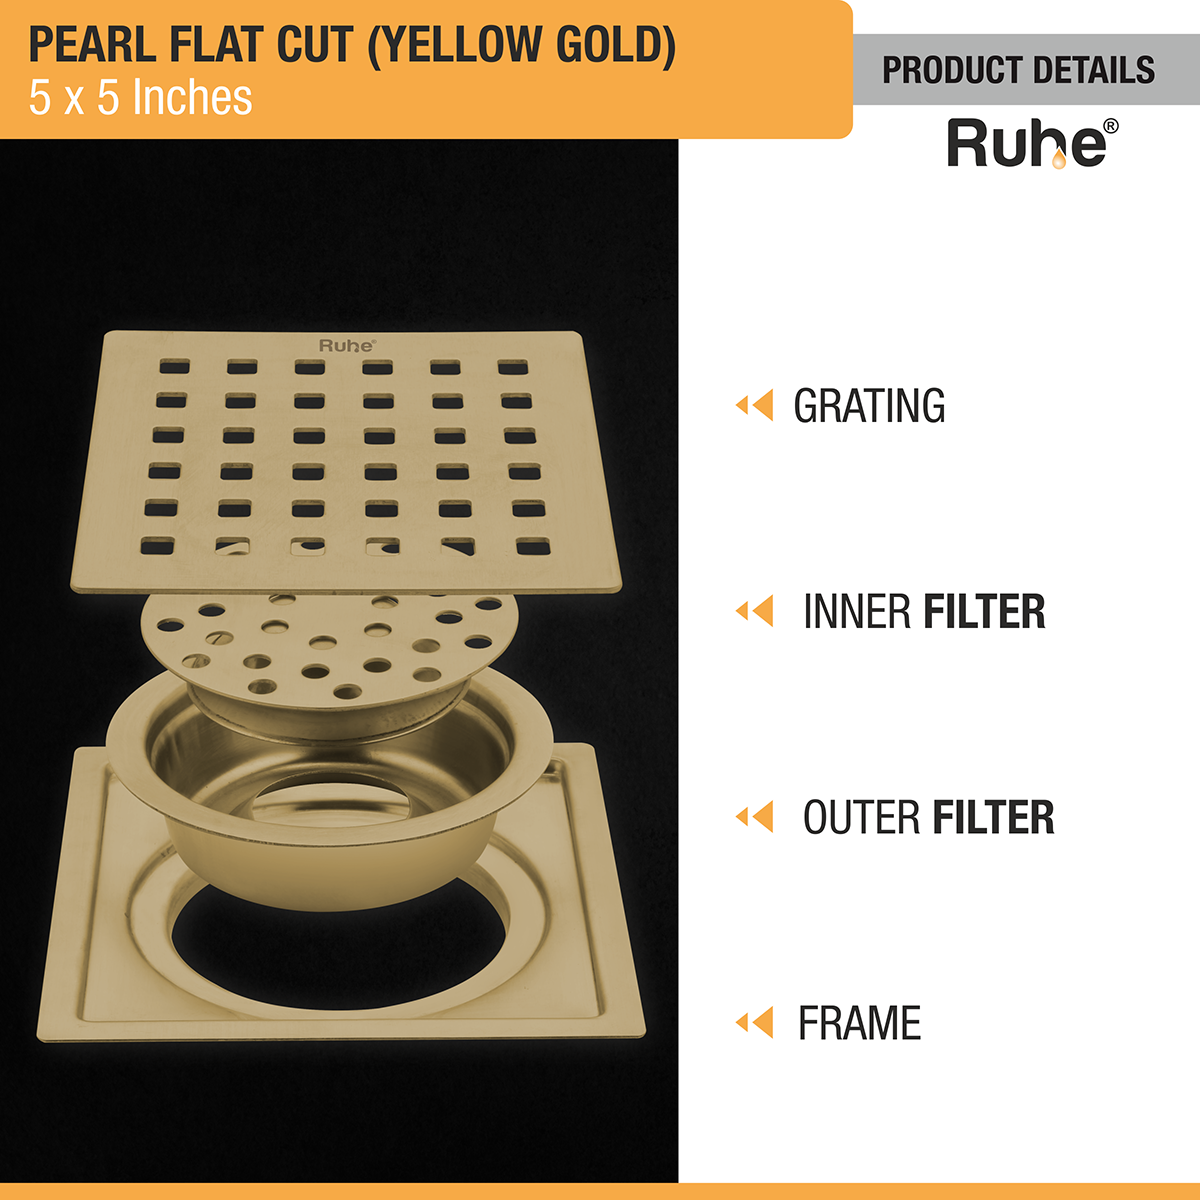 Pearl Square Flat Cut Floor Drain in Yellow Gold PVD Coating (5 x 5 Inches) product details